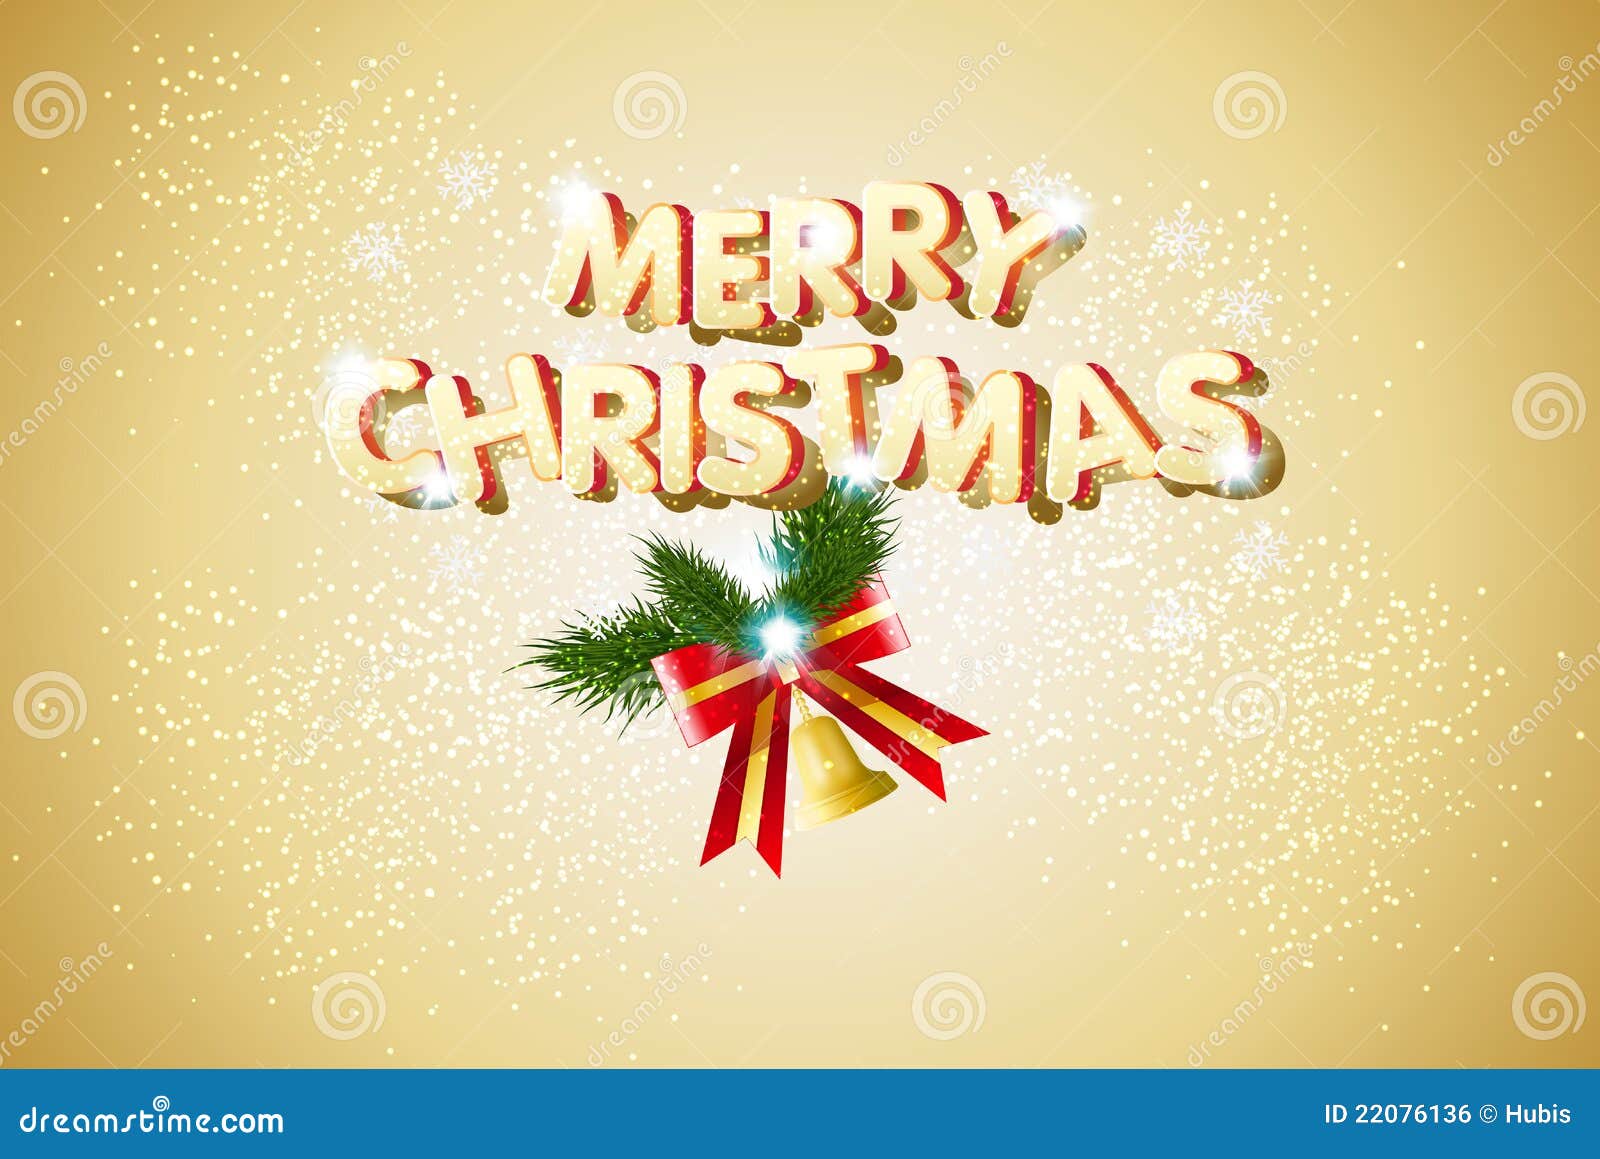 Merry Christmas card stock vector. Image of background 